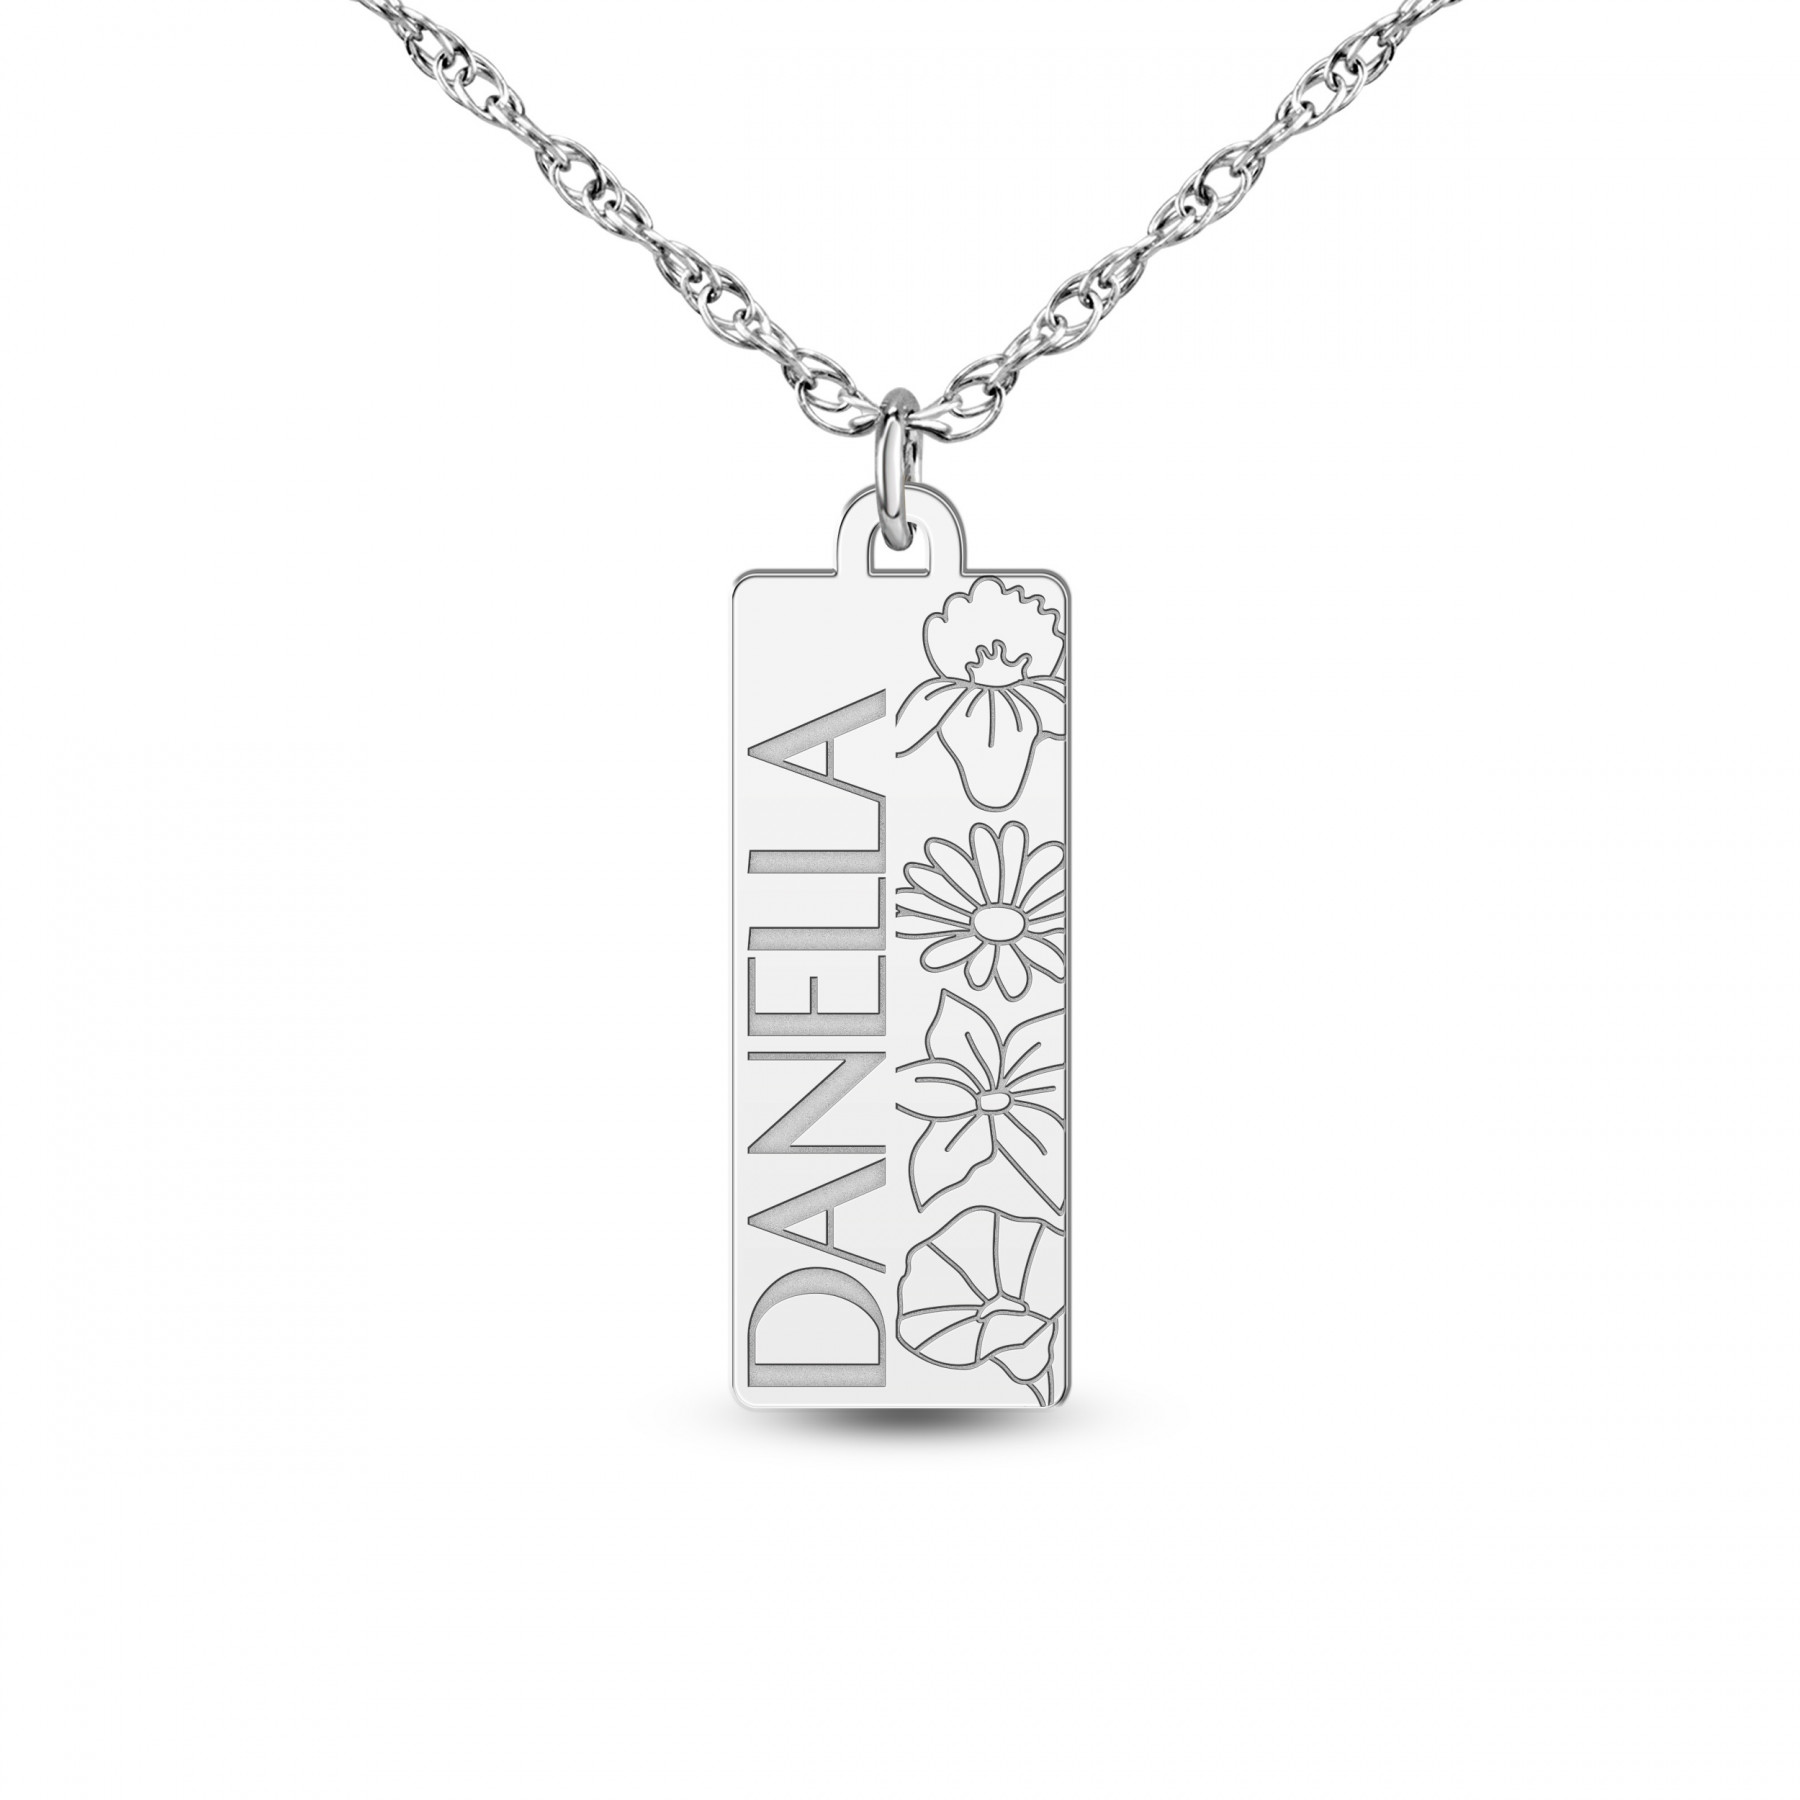 Birth Flower and Name Tag Pendant Necklace | Banter